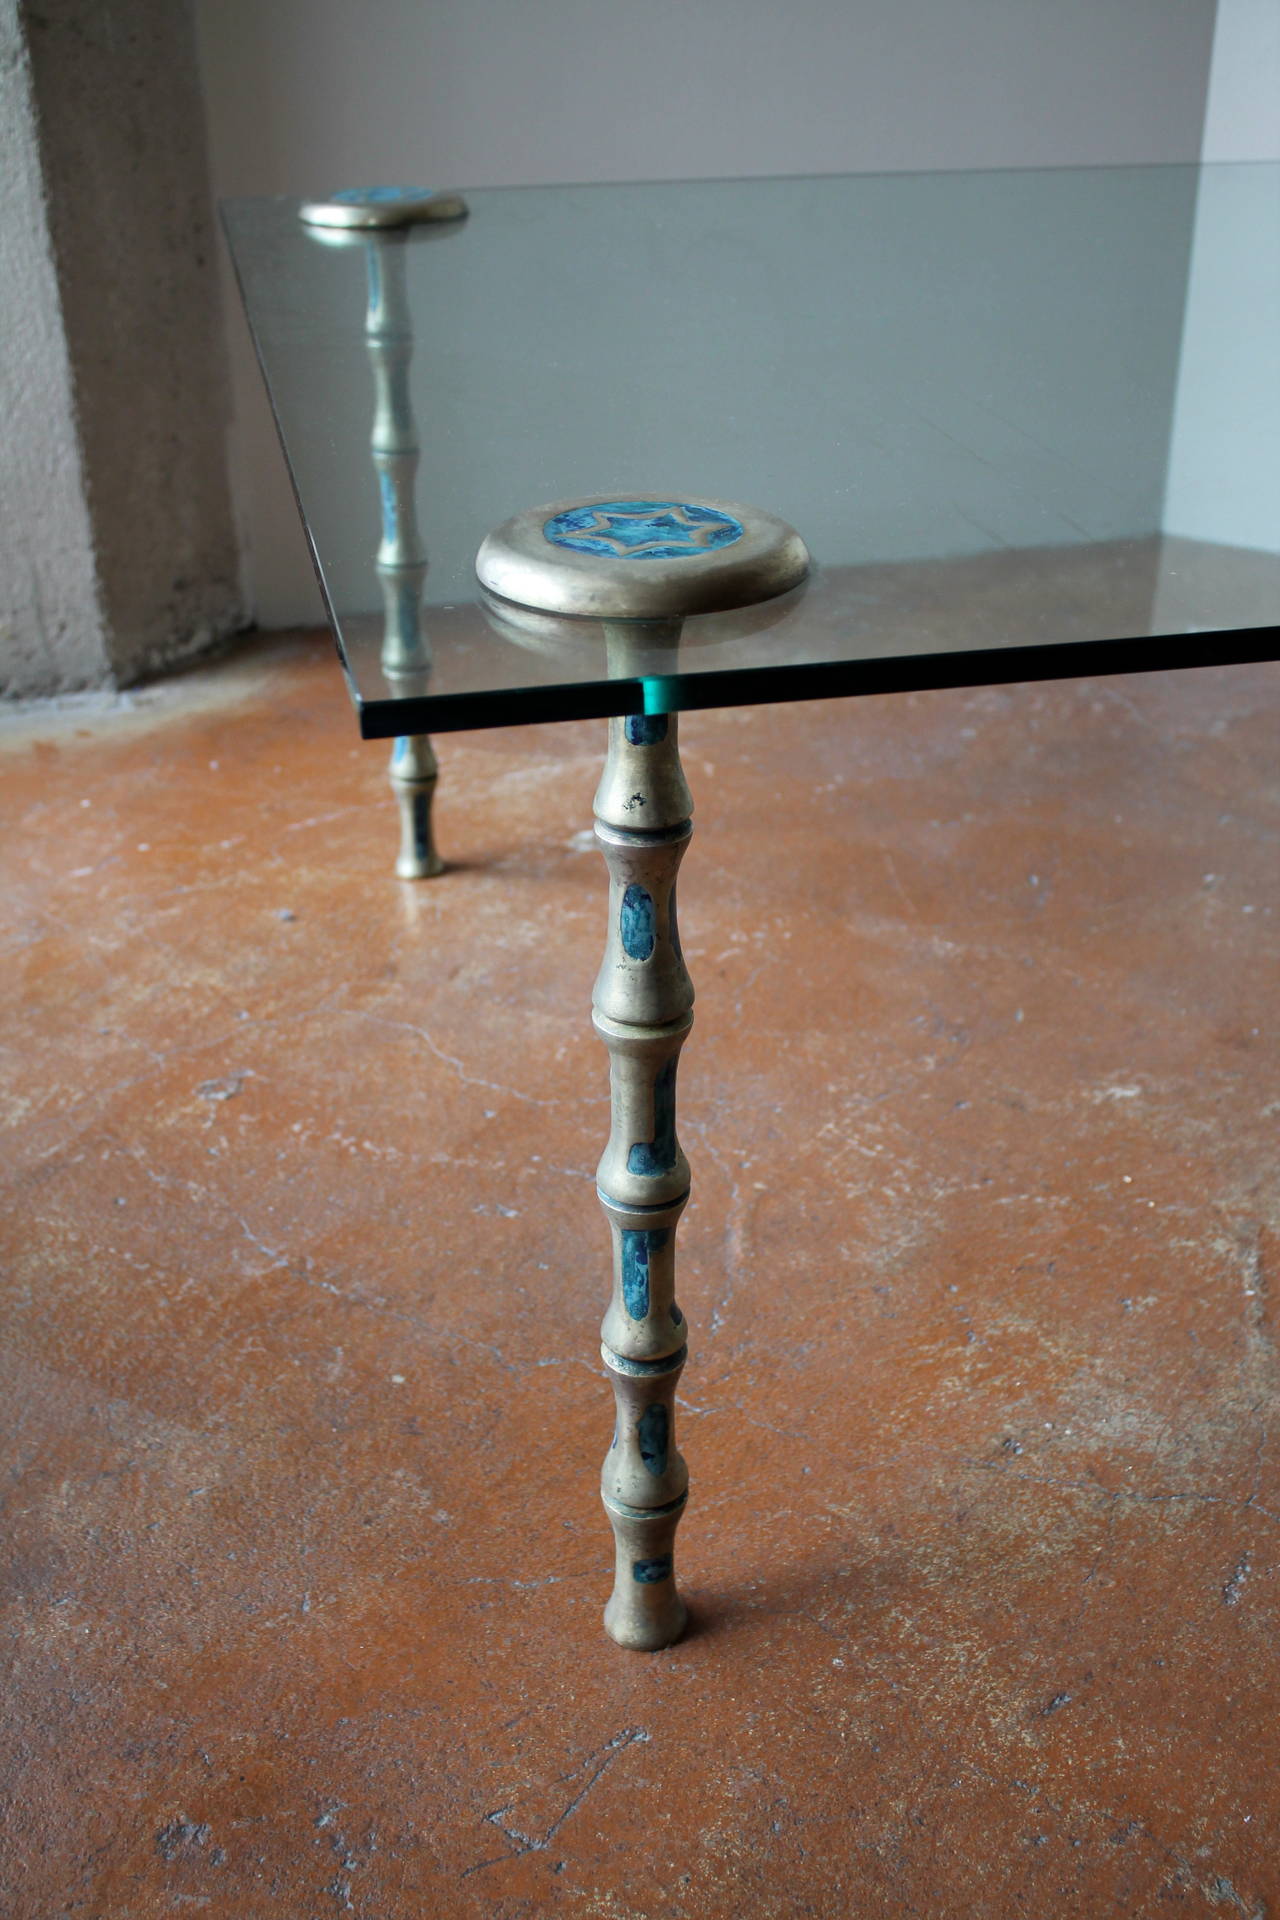 Mid-Century Modern Rare Brass Bamboo Coffee Table by Pepe Mendoza, Mexico City, 1958 For Sale